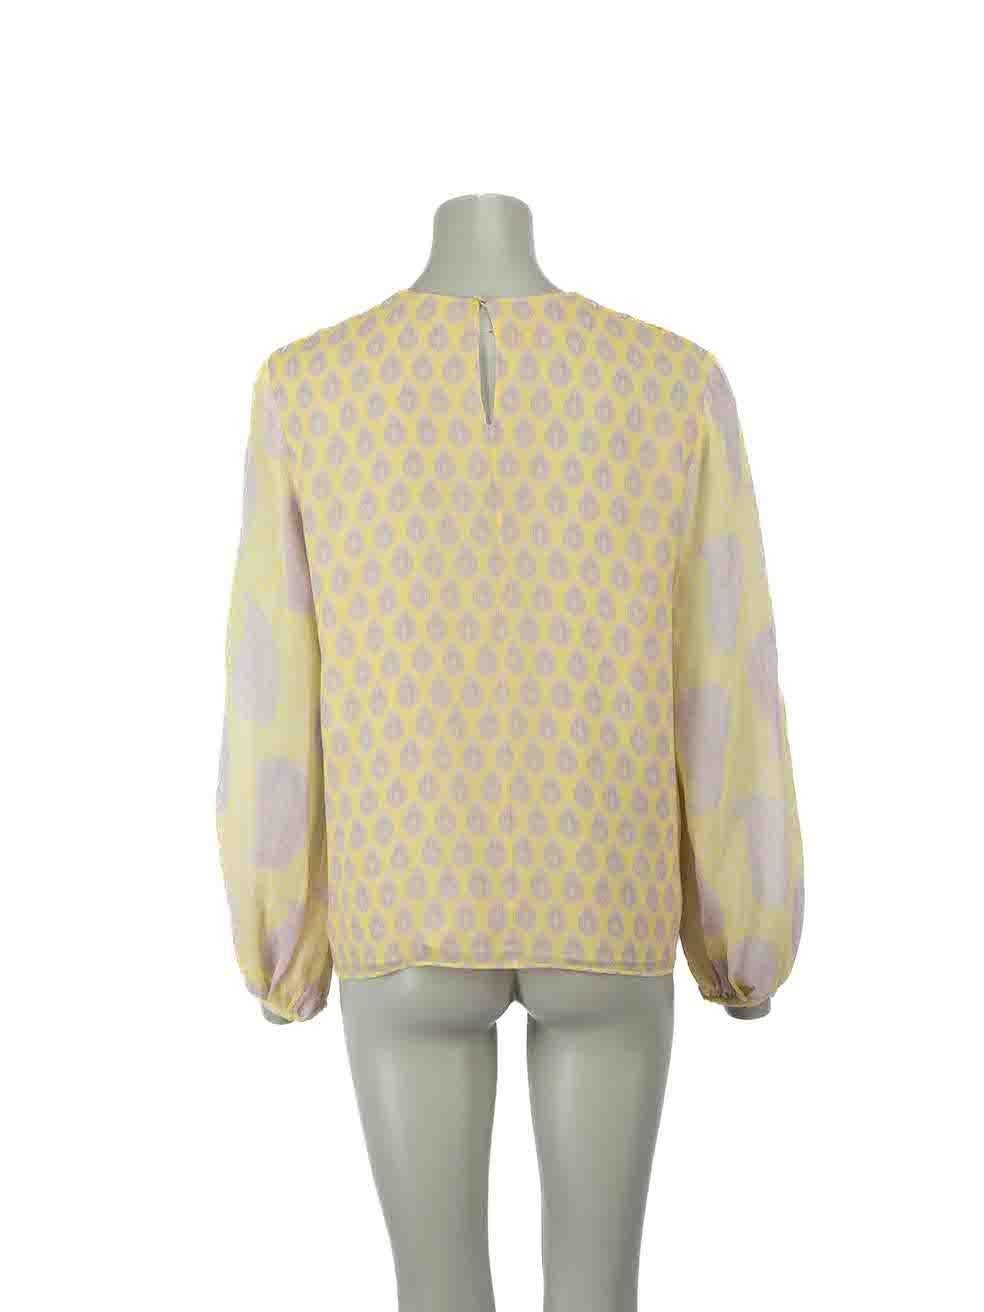 Giambattista Valli Yellow Floral Embroidered Top Size L In Excellent Condition For Sale In London, GB